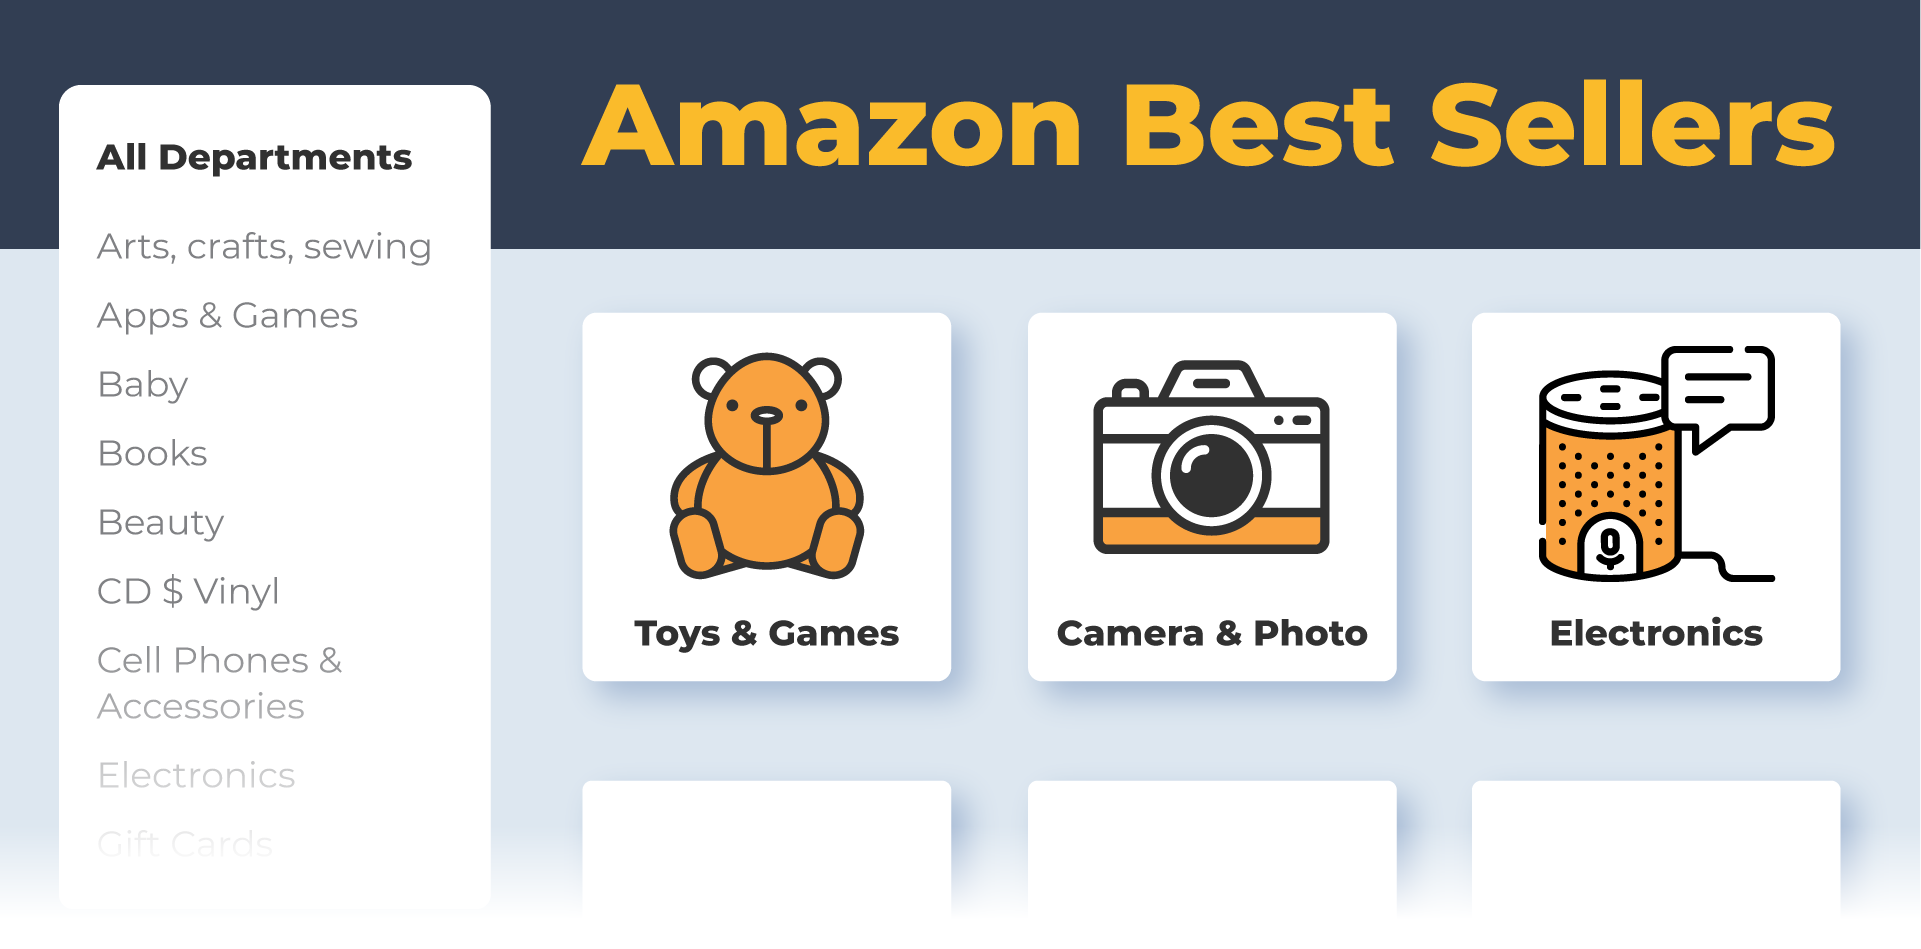 5 Best Selling Products on Amazon and How to Find Them